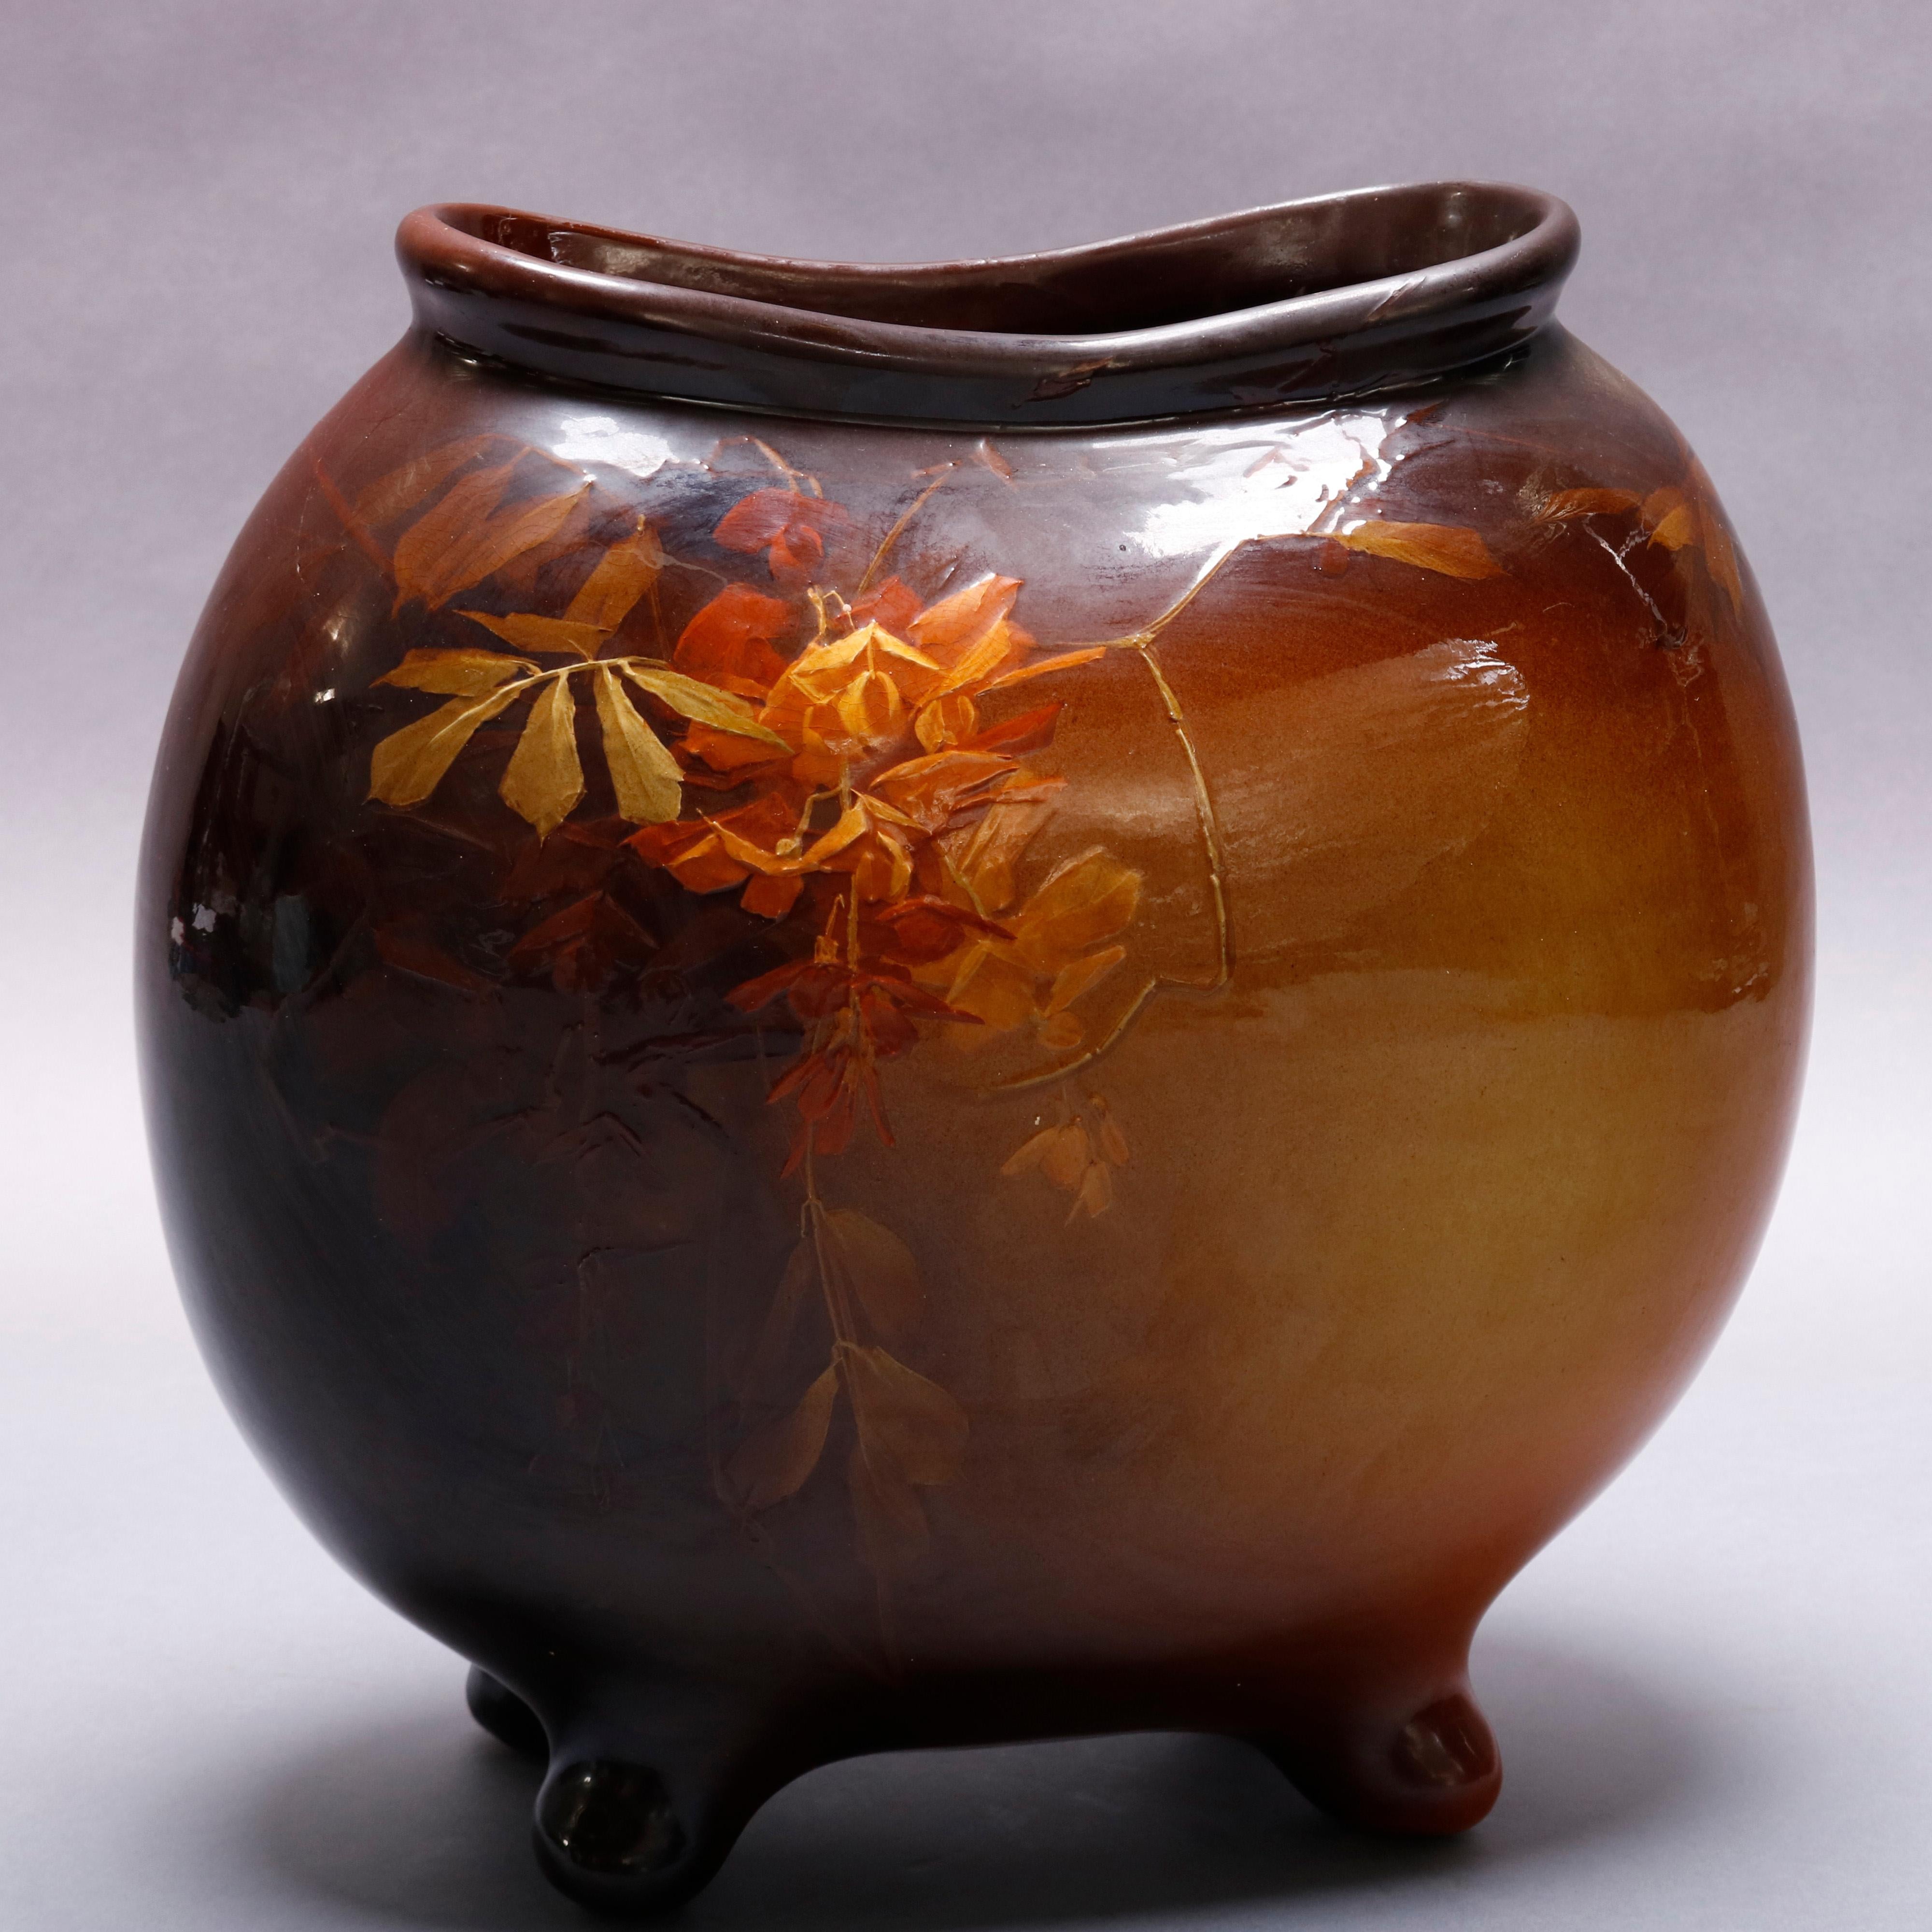 An antique Owens art pottery vase offers footed pillow form hand decorated in Utopian Floral decoration, reminiscent of Weller, Owens Pottery maker stamp on base, circa 1920

Measures: 12